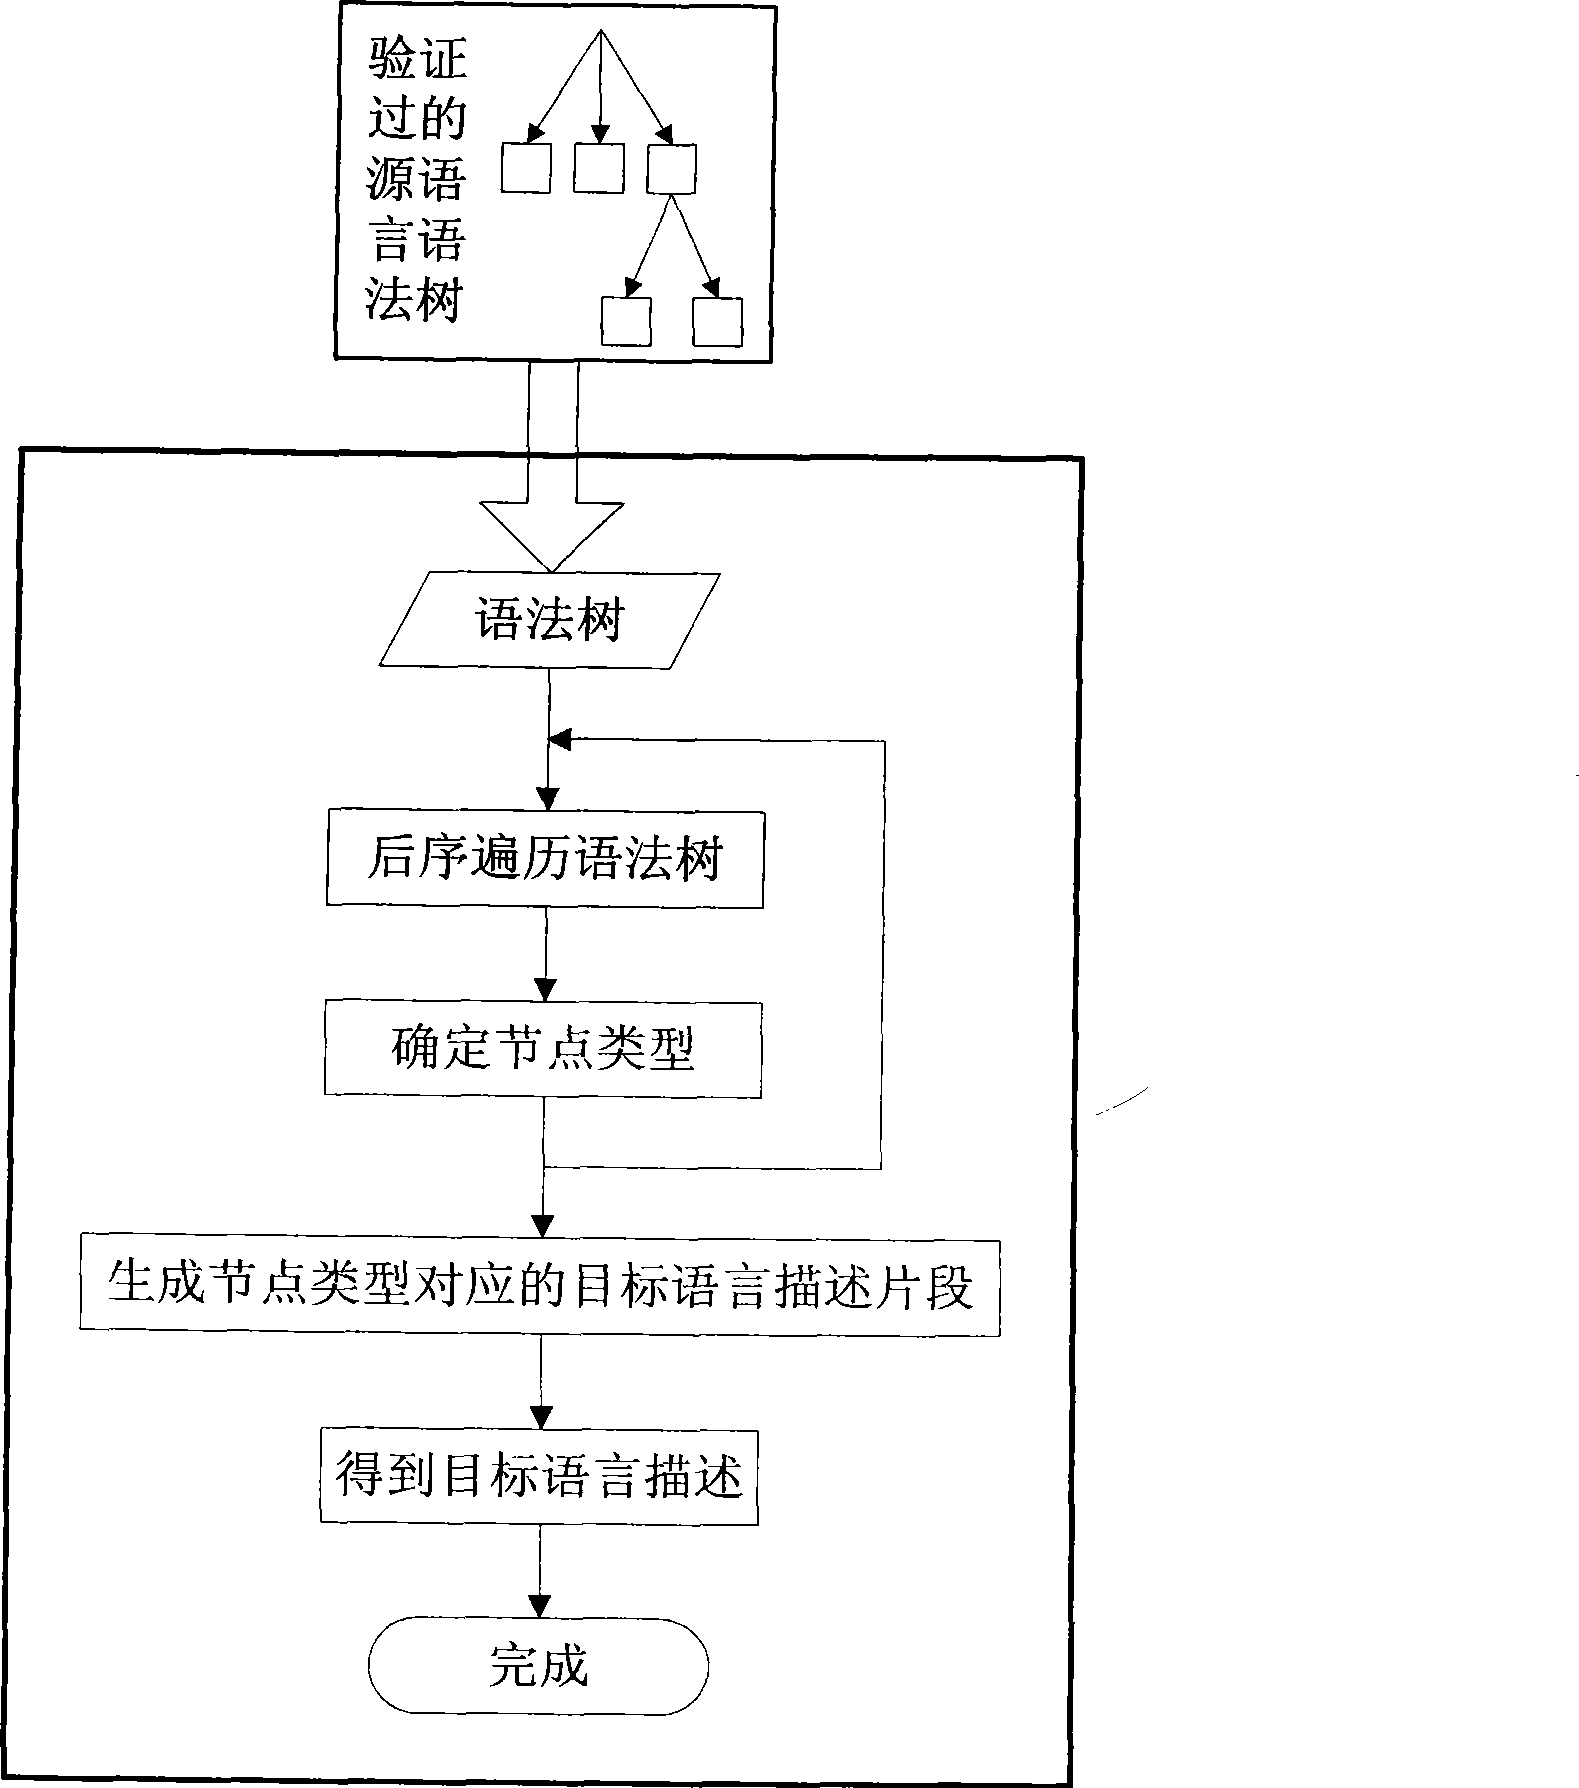 Method and converter for converting high level language to other high level languages